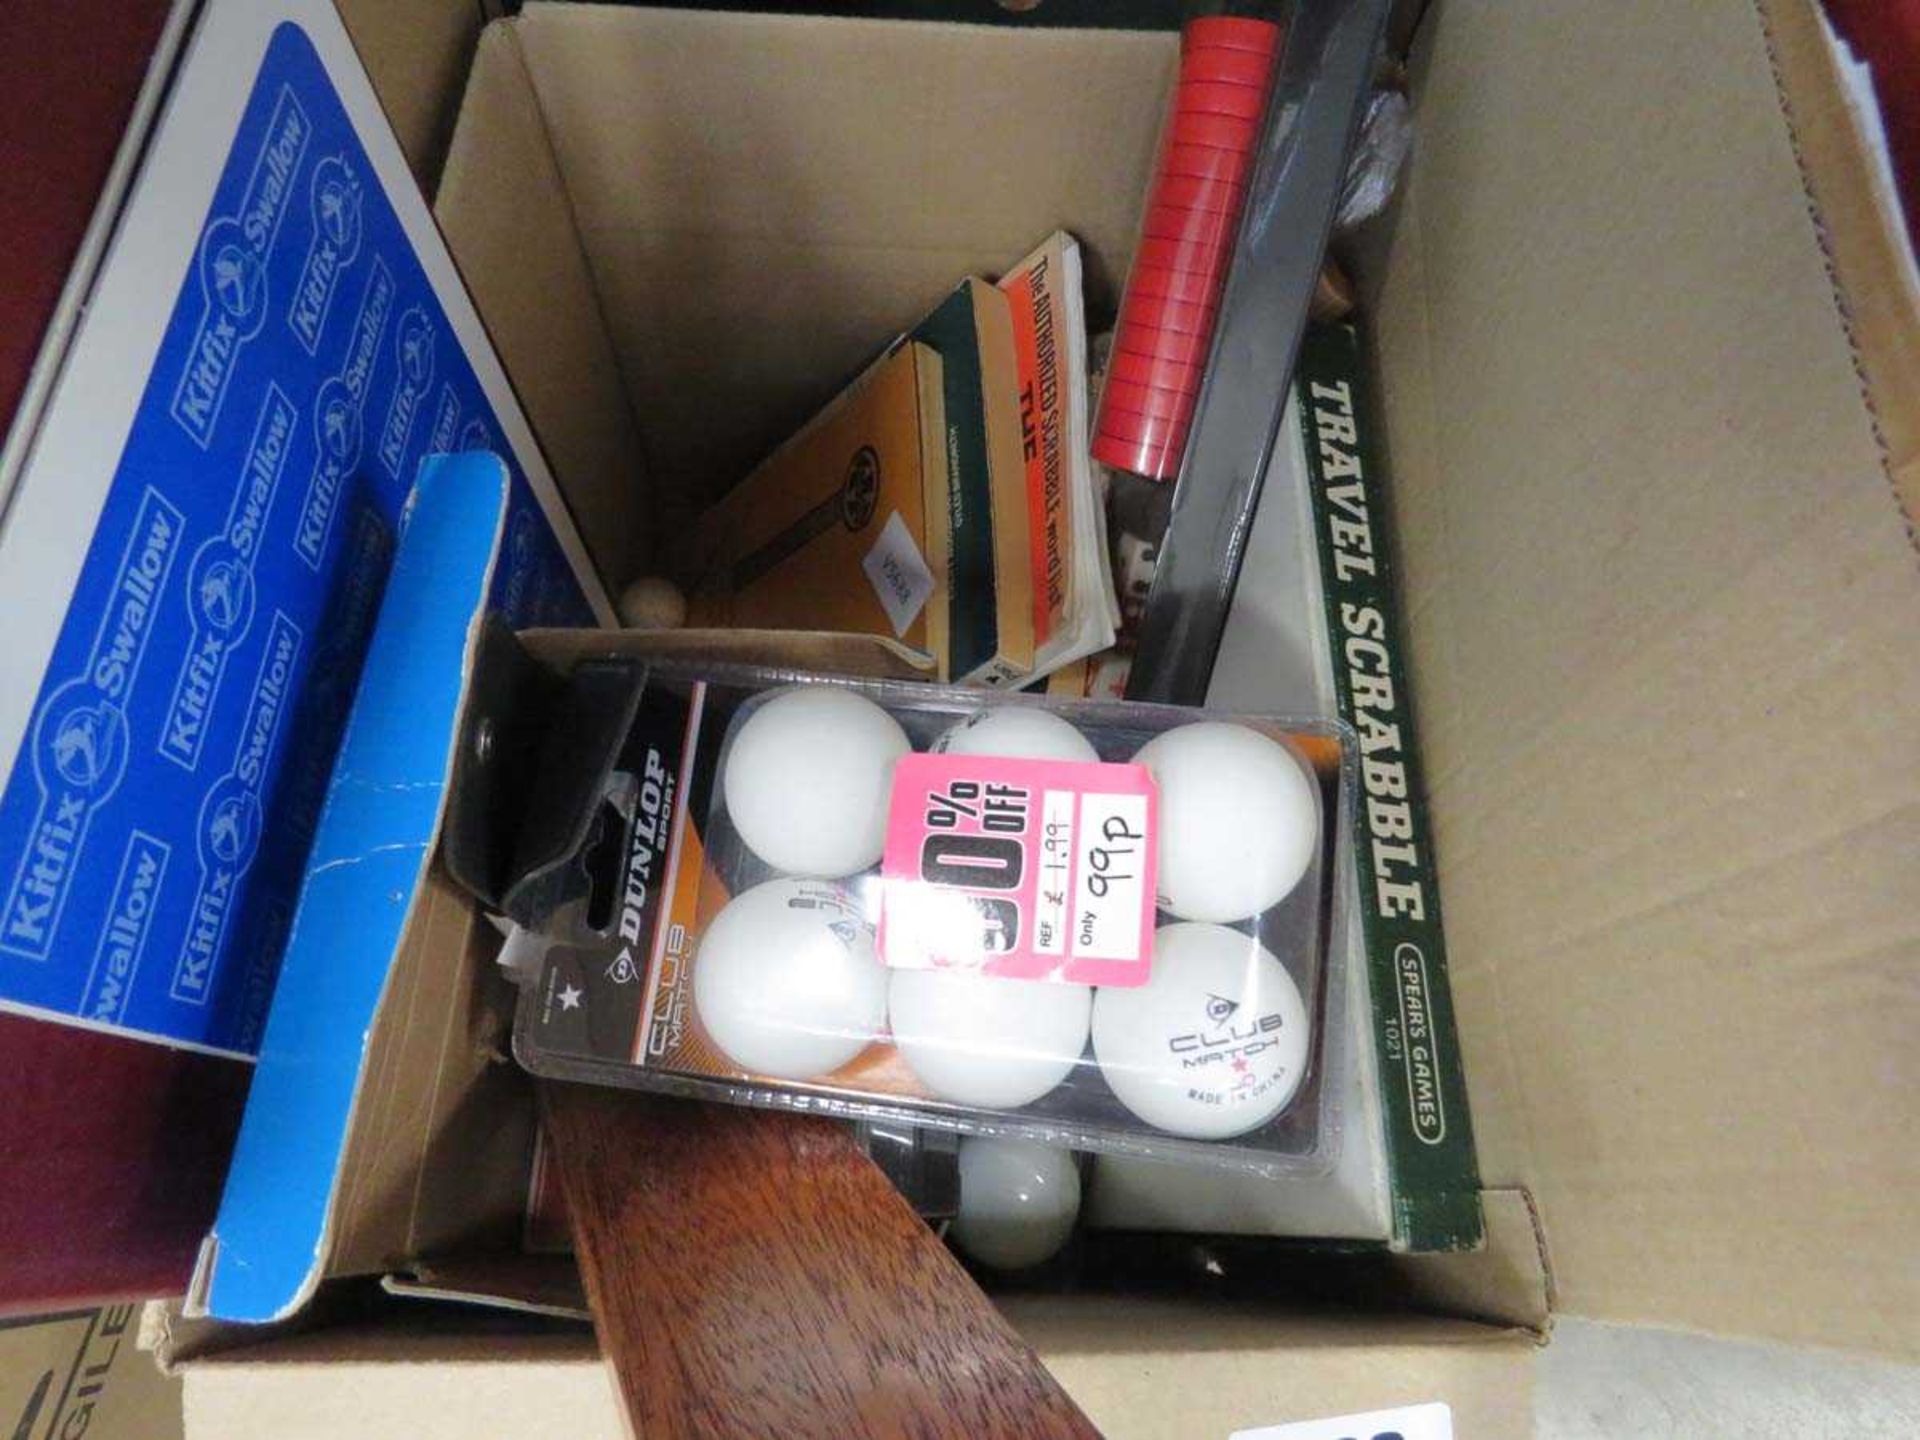 4 boxes containing rose patterned crockery, ping pong balls, gaming chips, books, modern biscuit - Image 2 of 4